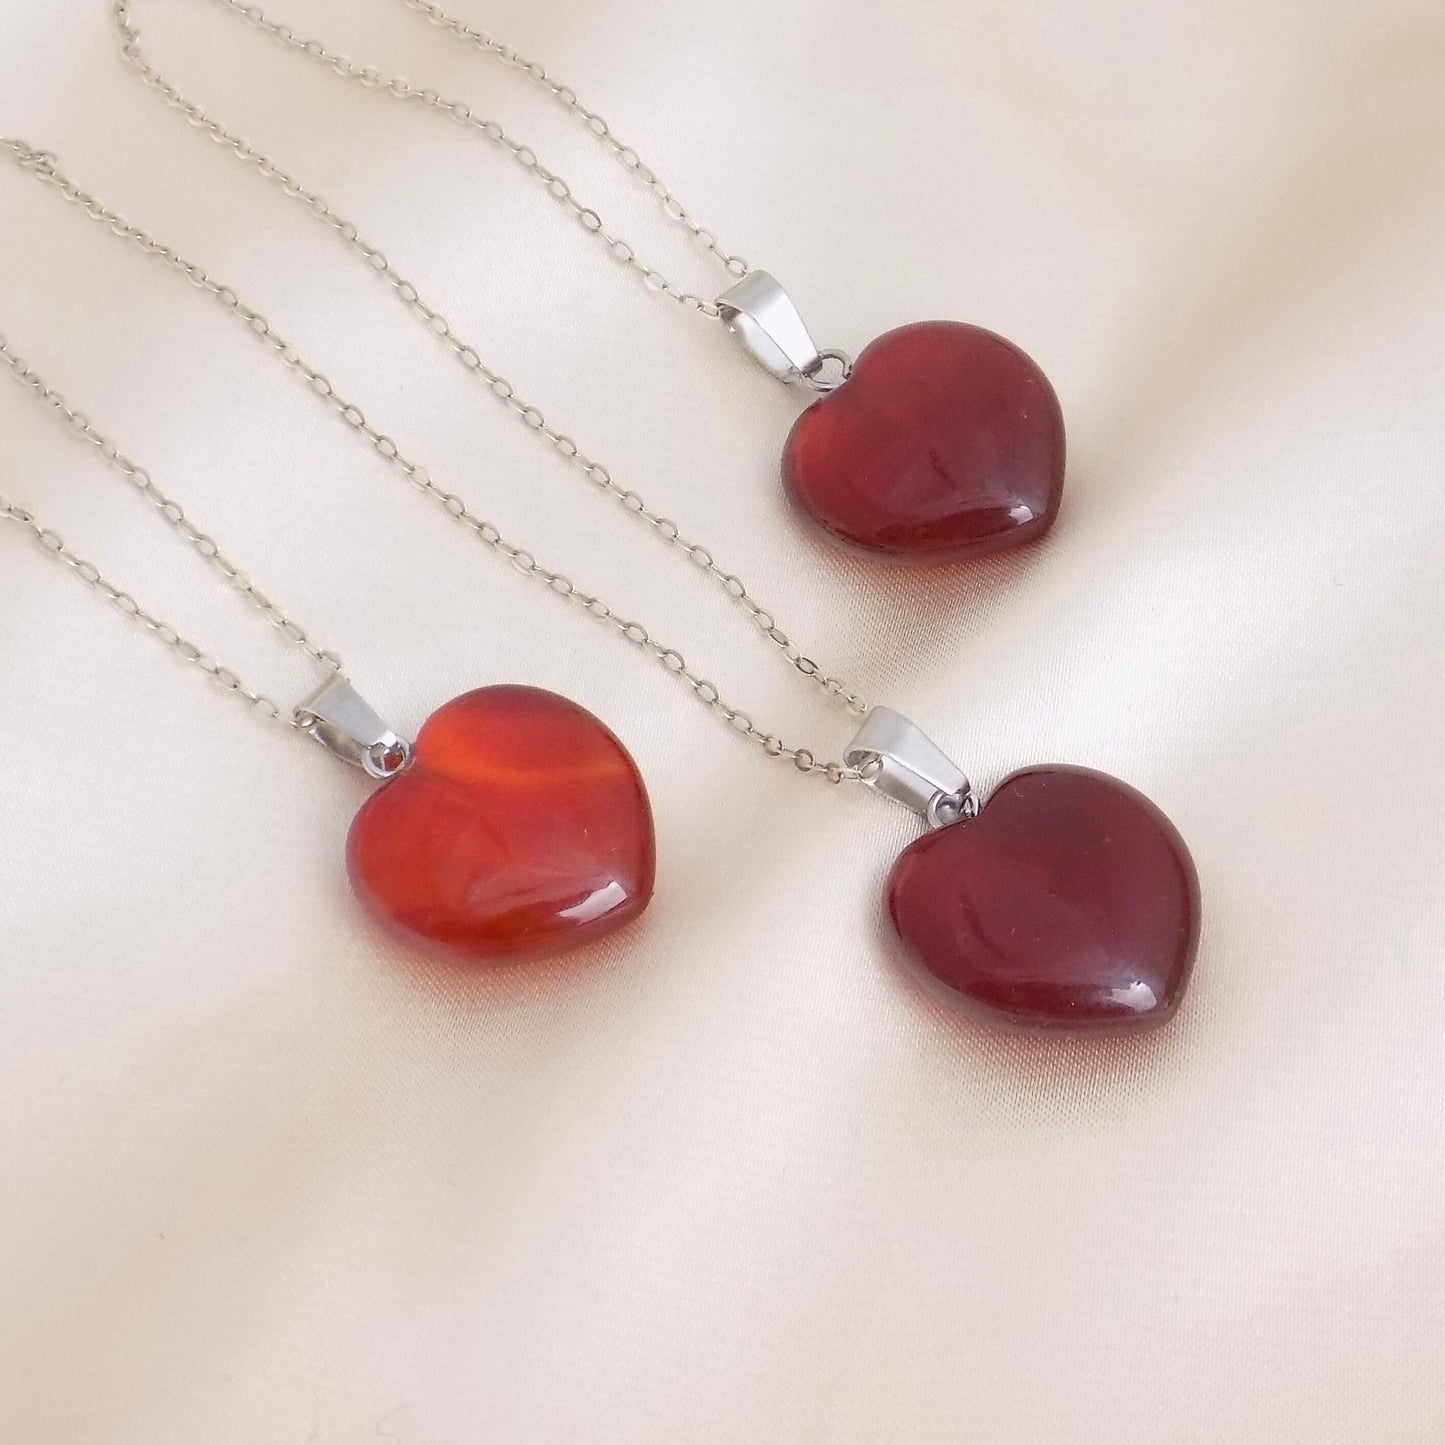 Natural Gemstone Carnelian Heart Necklace on 925 Sterling Silver Chain, Valentines Day Gift Women, M6-132